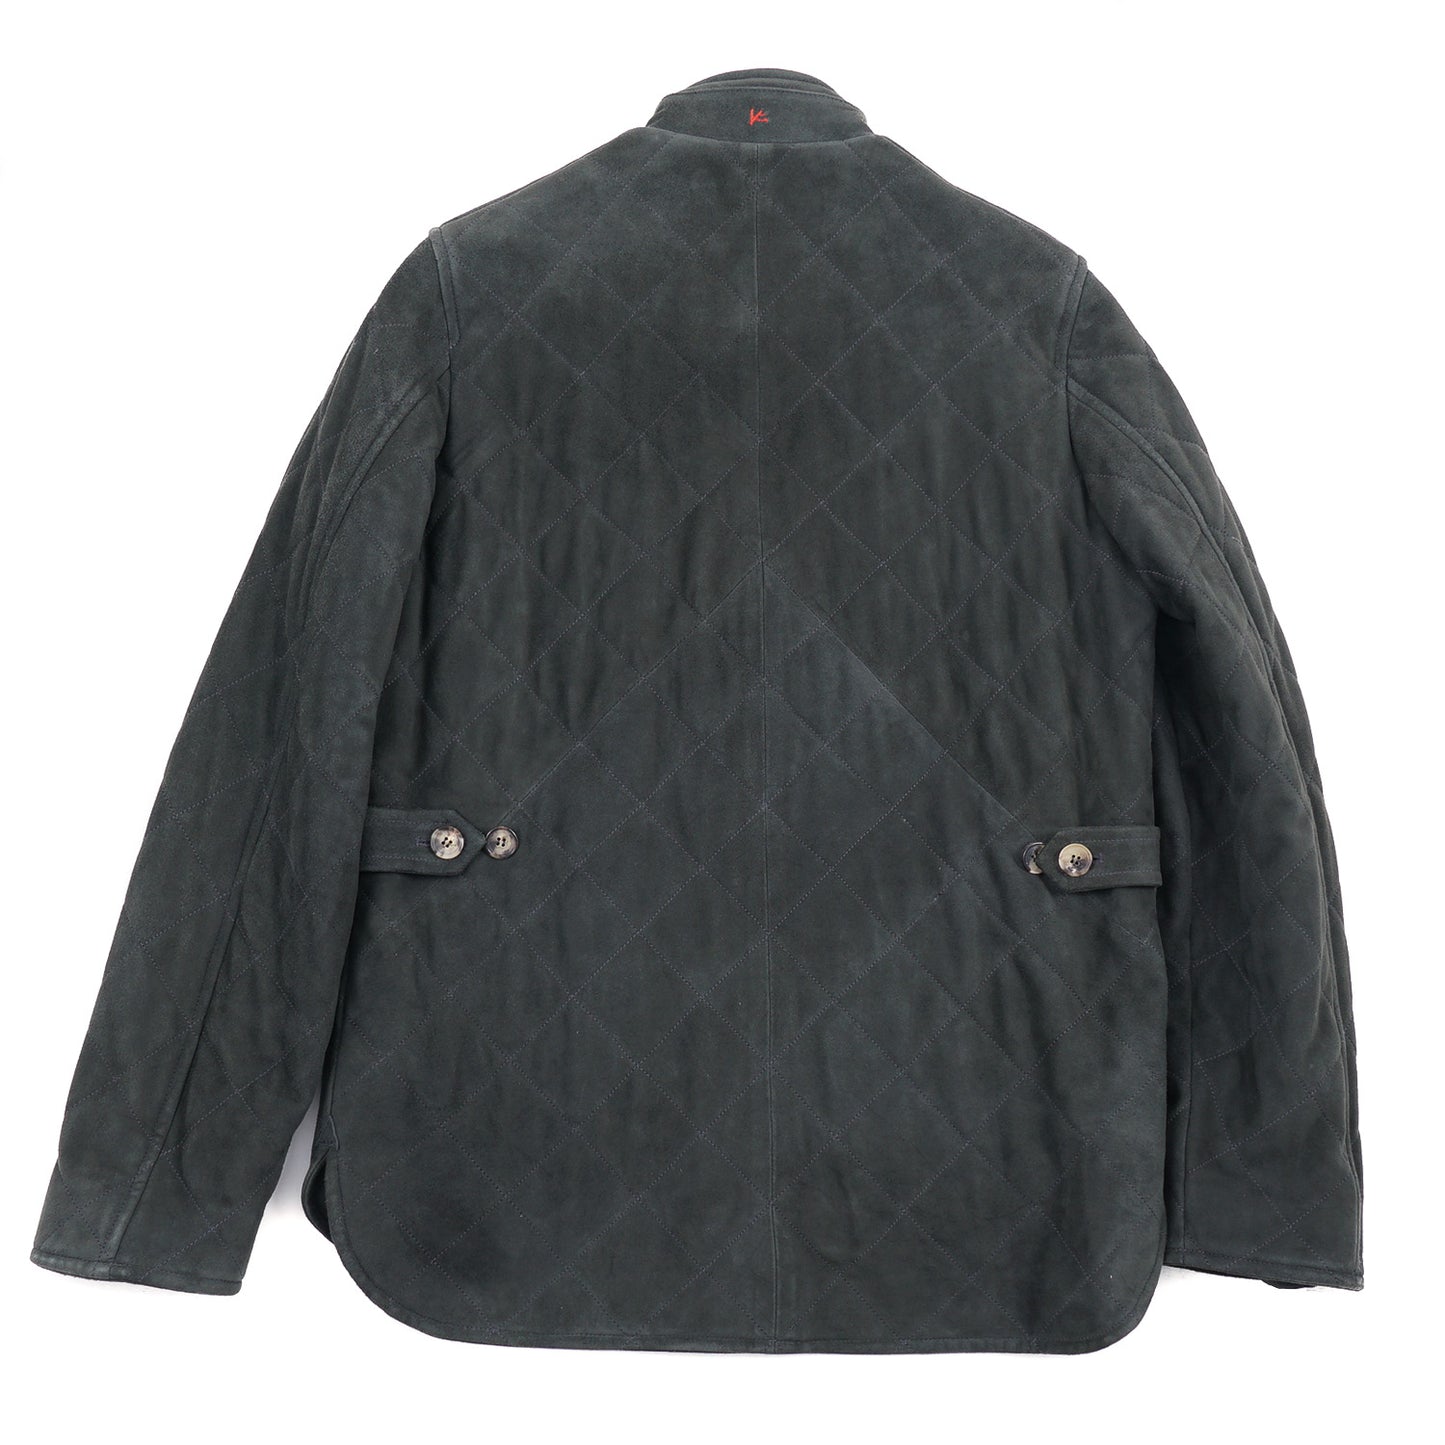 Isaia Quilted Suede Leather Jacket - Top Shelf Apparel